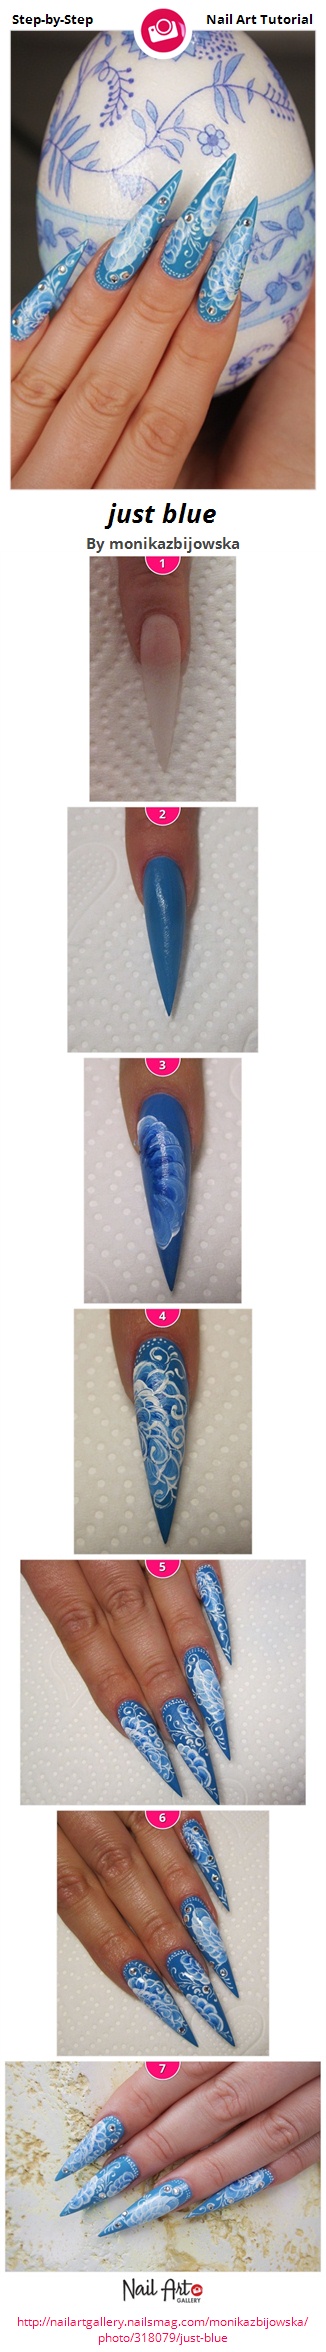 just blue - Nail Art Gallery